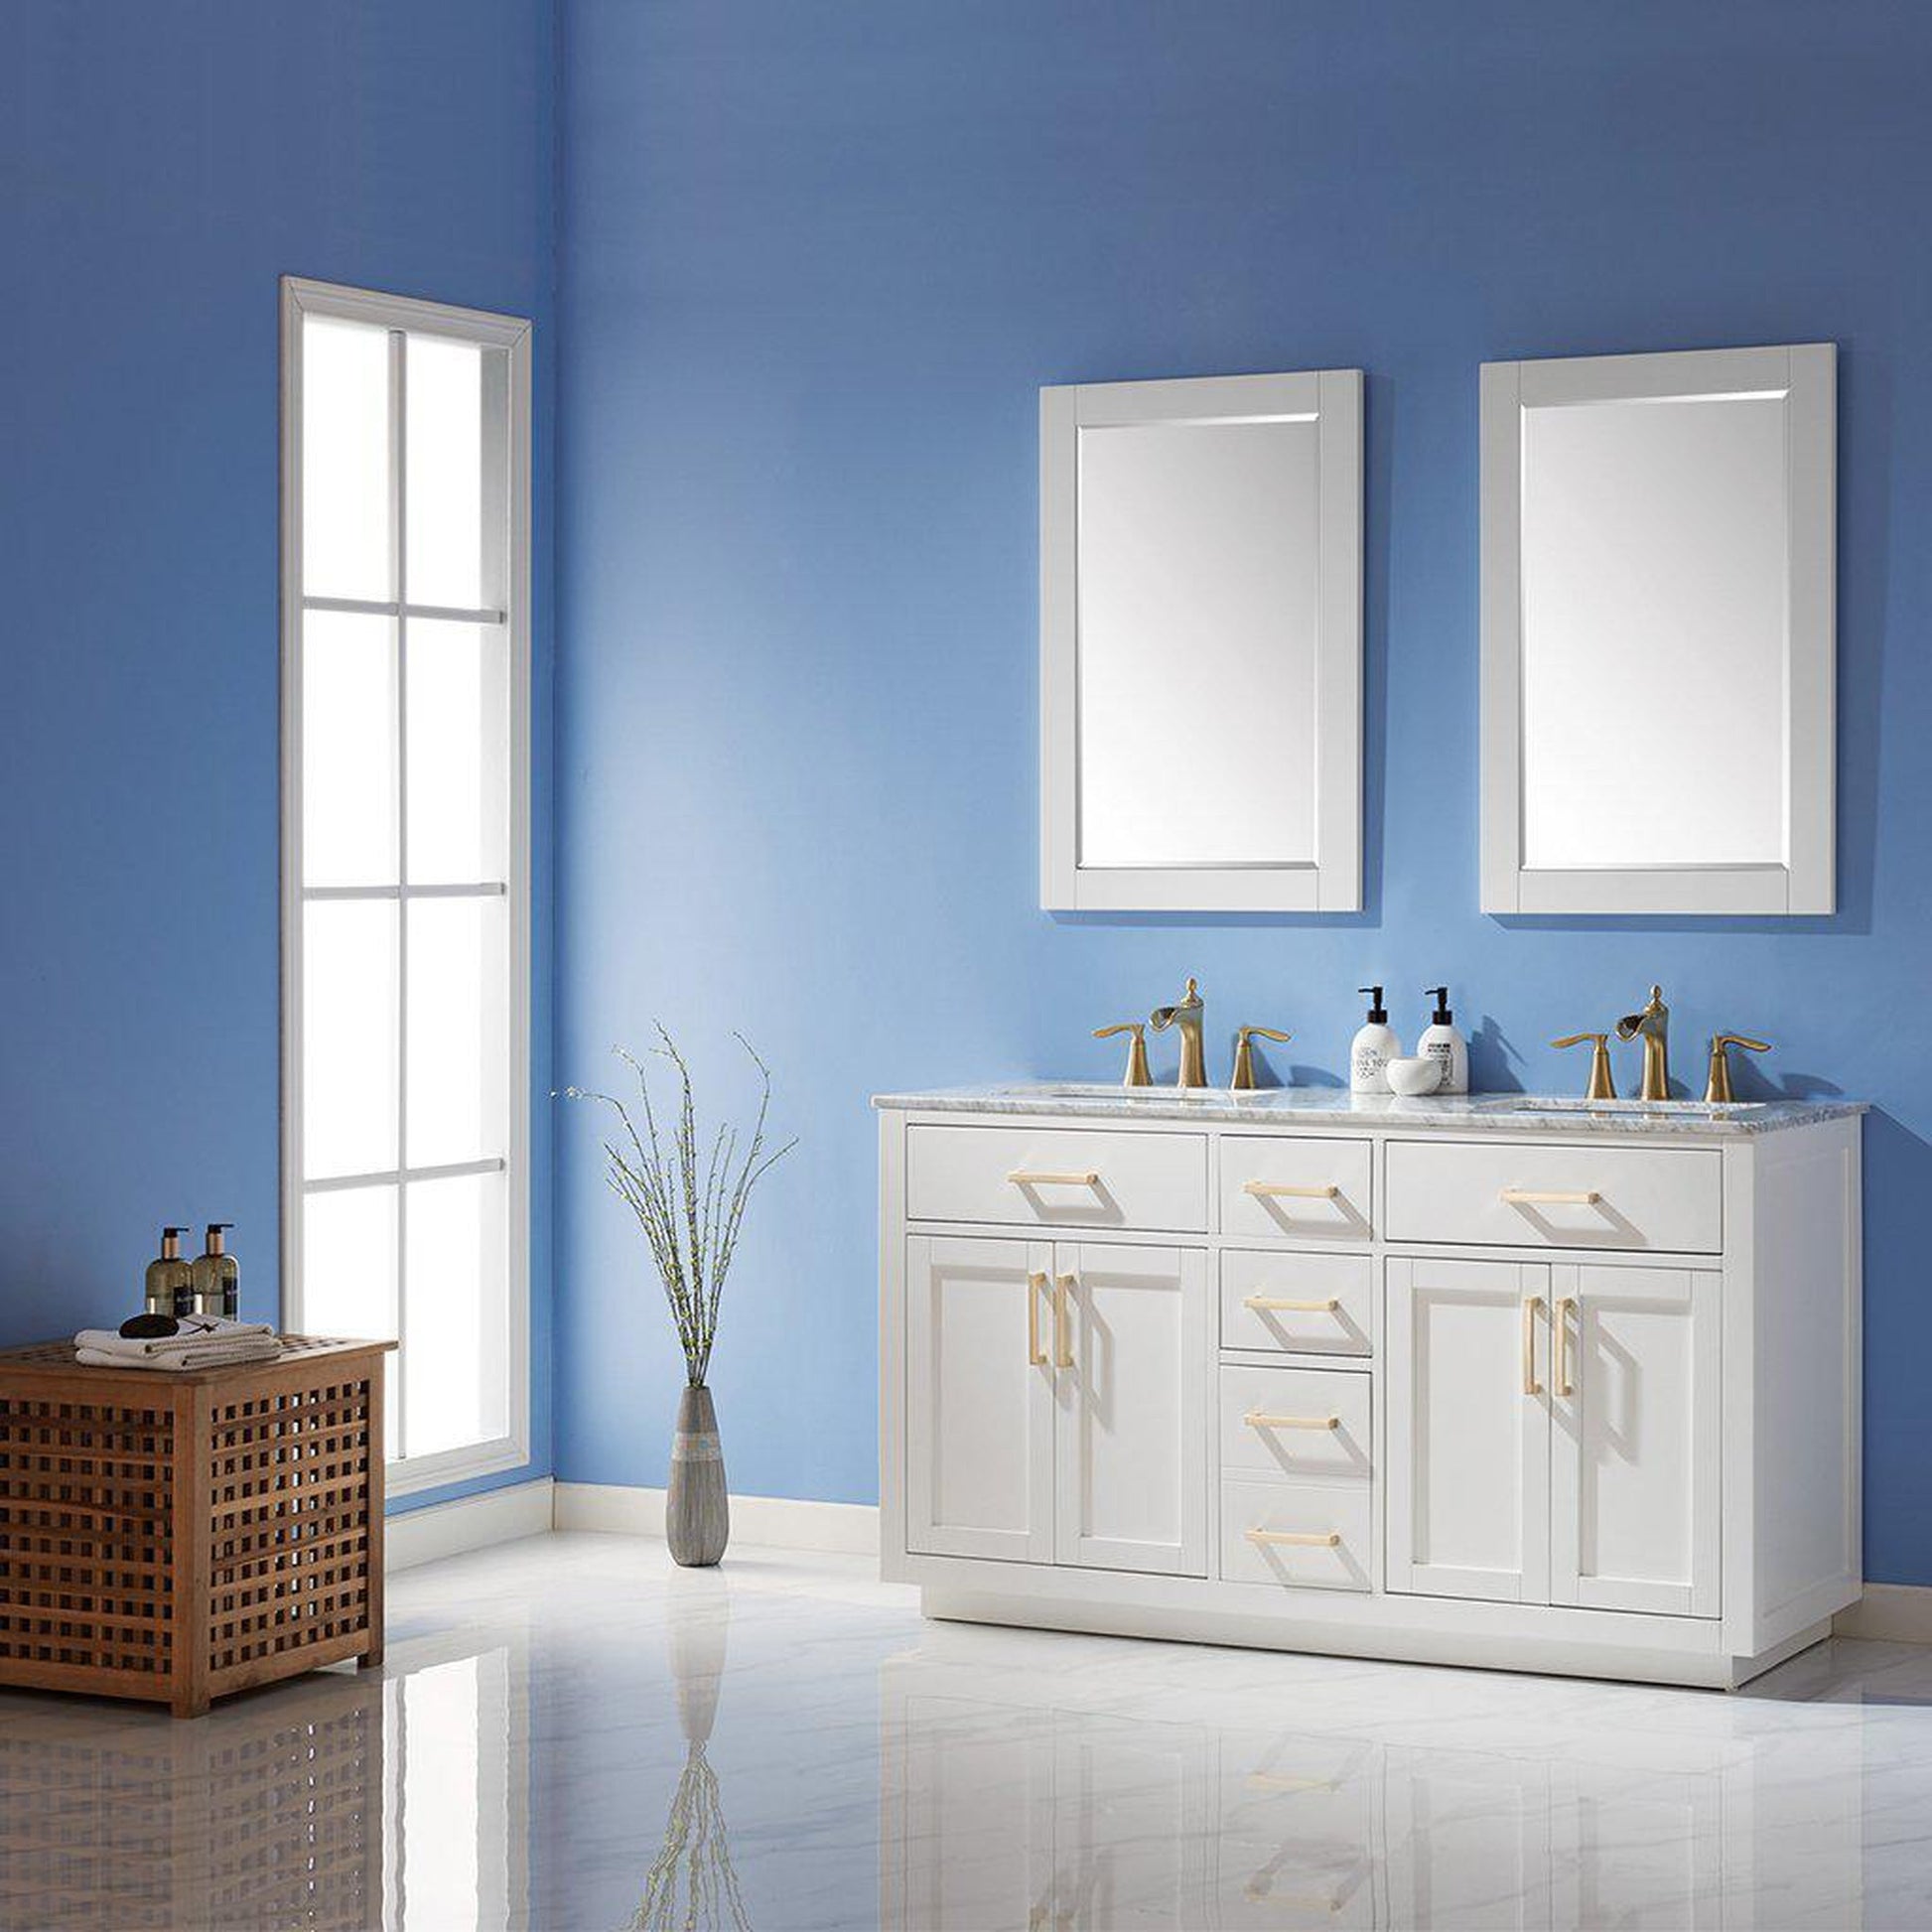 Altair Ivy 60" Double White Freestanding Bathroom Vanity Set With Mirror, Natural Carrara White Marble Top, Two Rectangular Undermount Ceramic Sinks, and Overflow